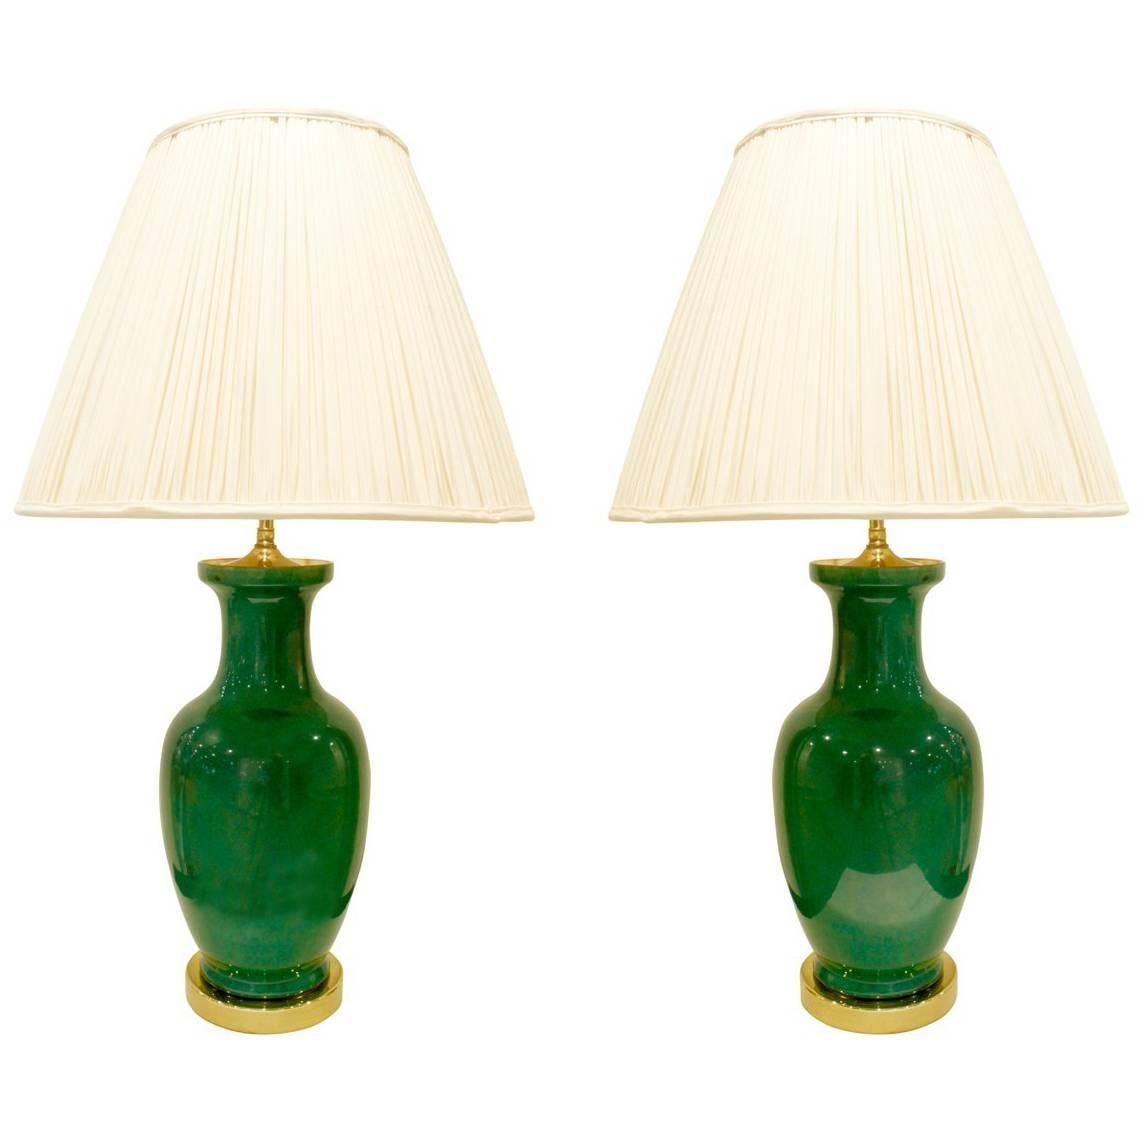 Fine Pair of Emerald Green Porcelain Table Lamps, 1960s